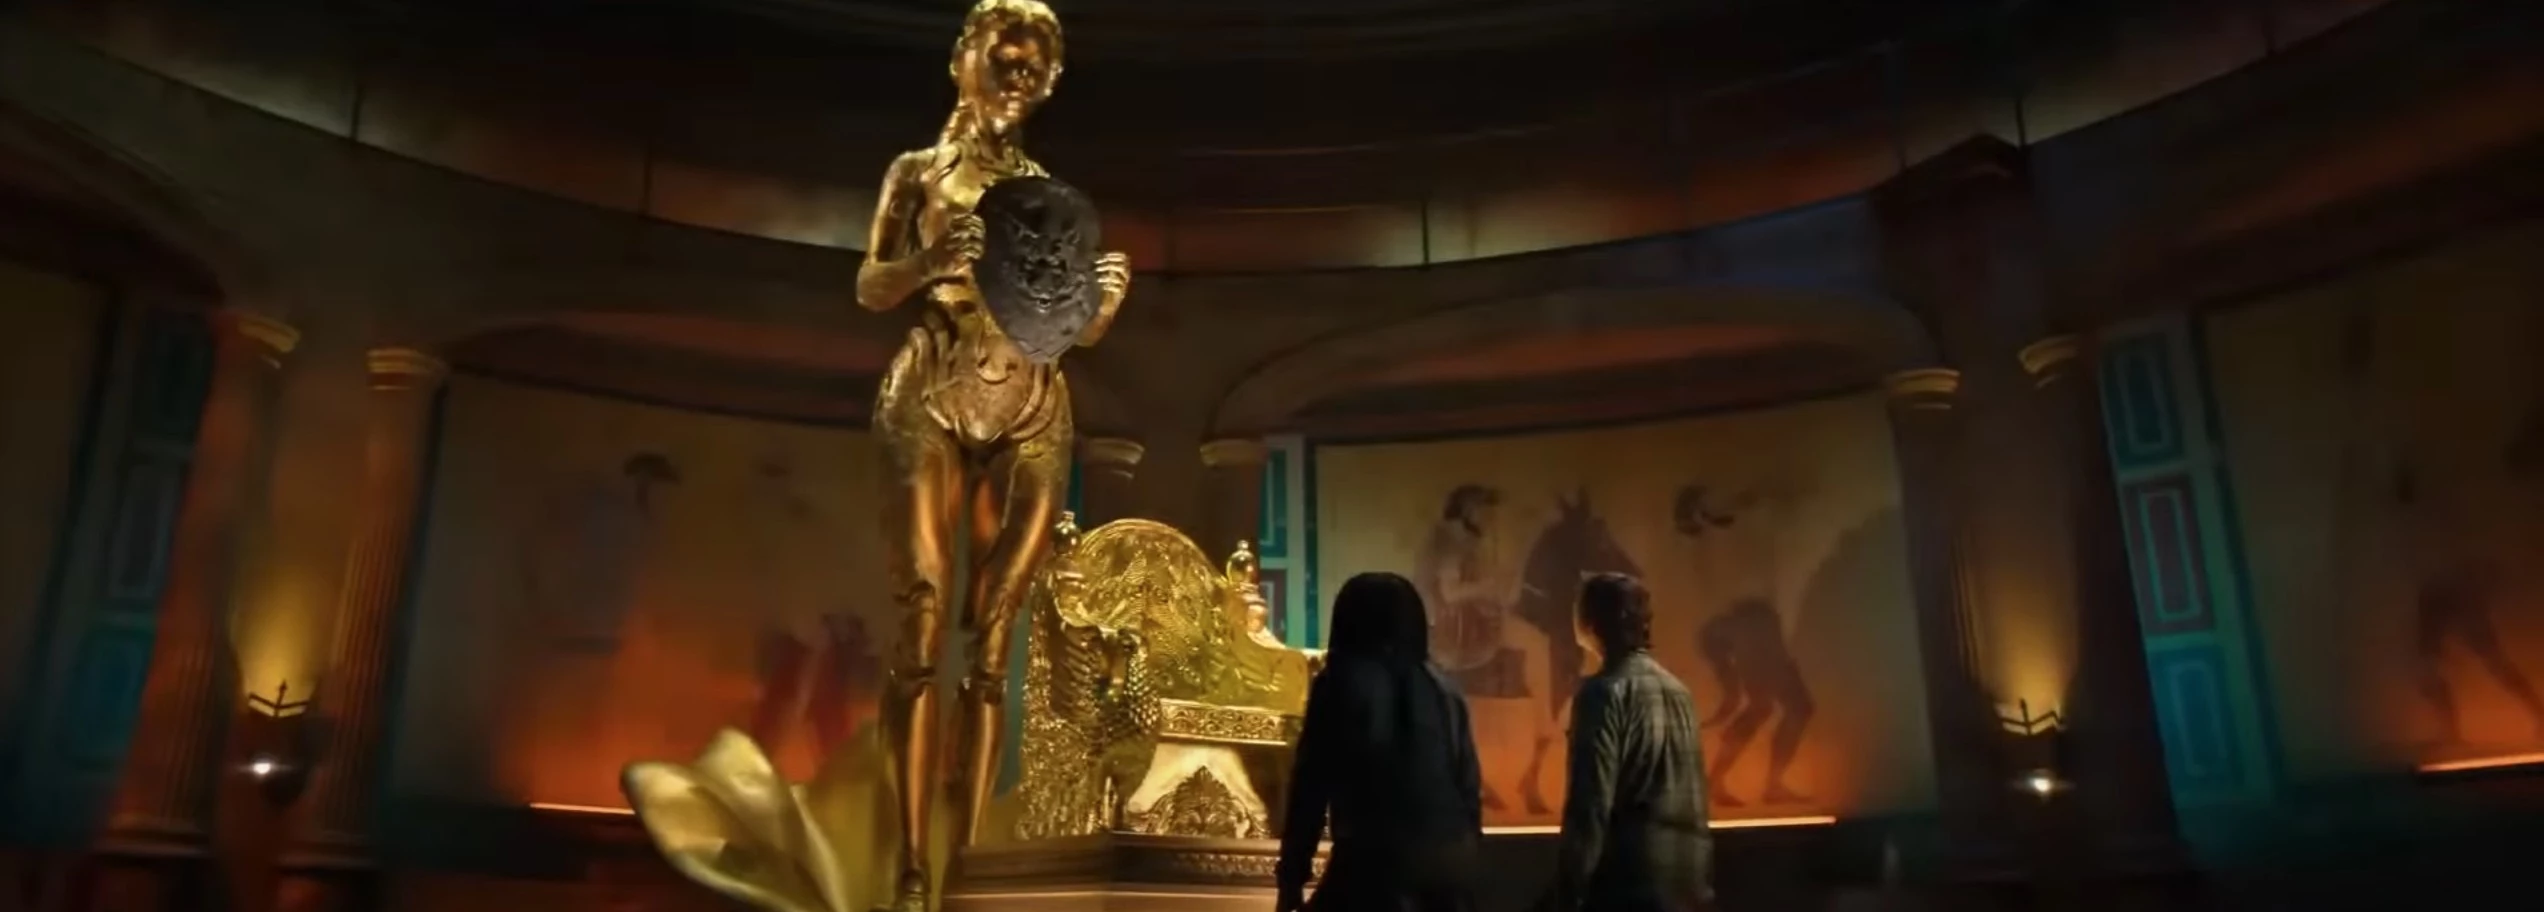 Percy Jackson and the Olympians Episode 6 Preview